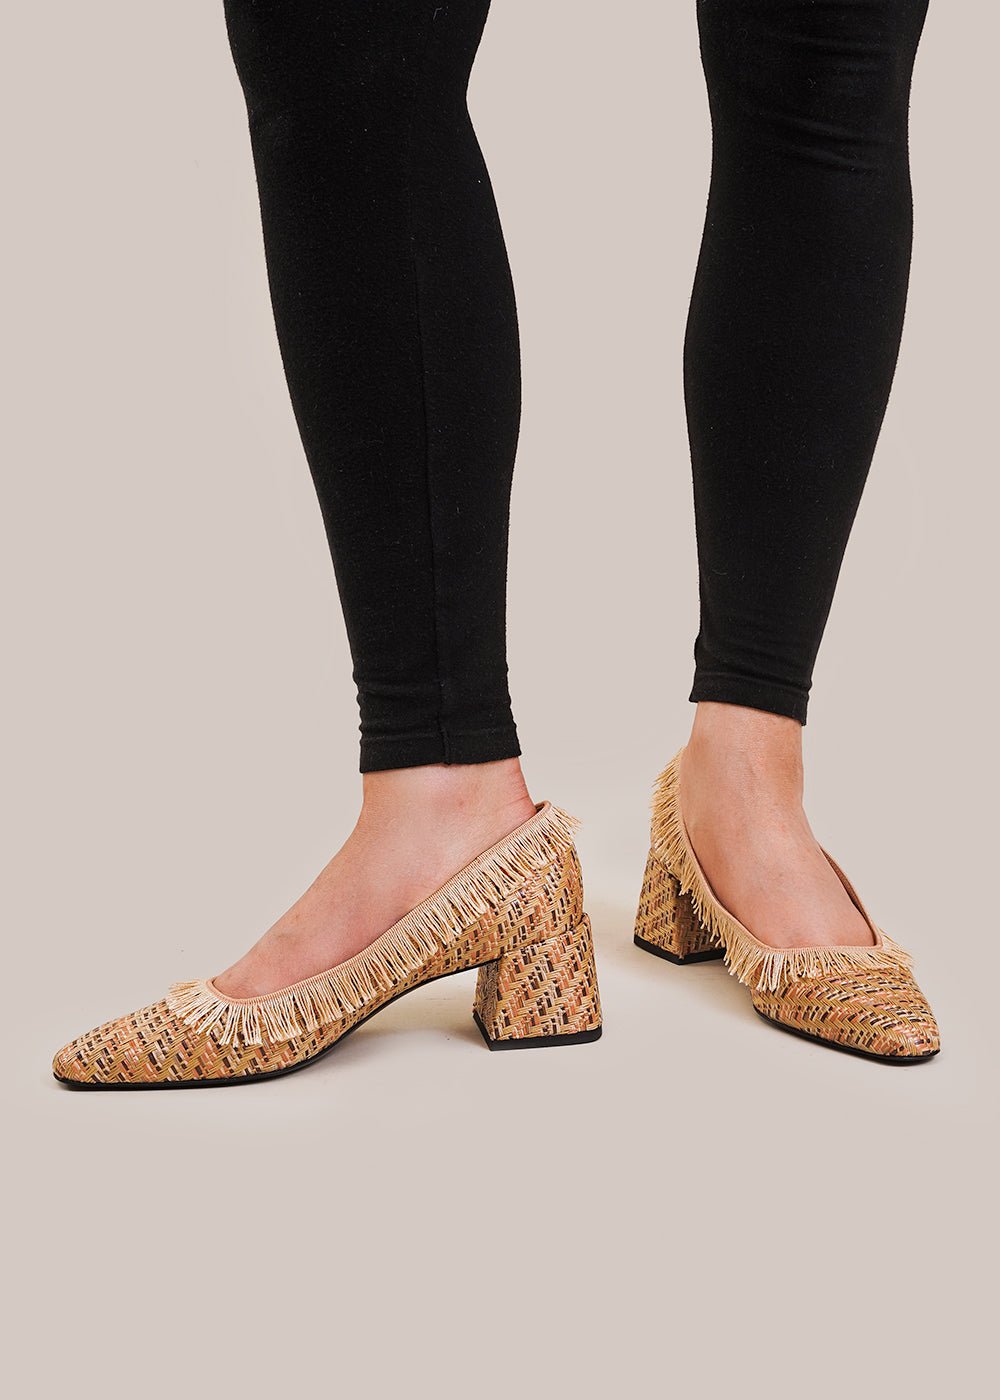 Suzanne Rae August Lady Pump - New Classics Studios Sustainable Ethical Fashion Canada